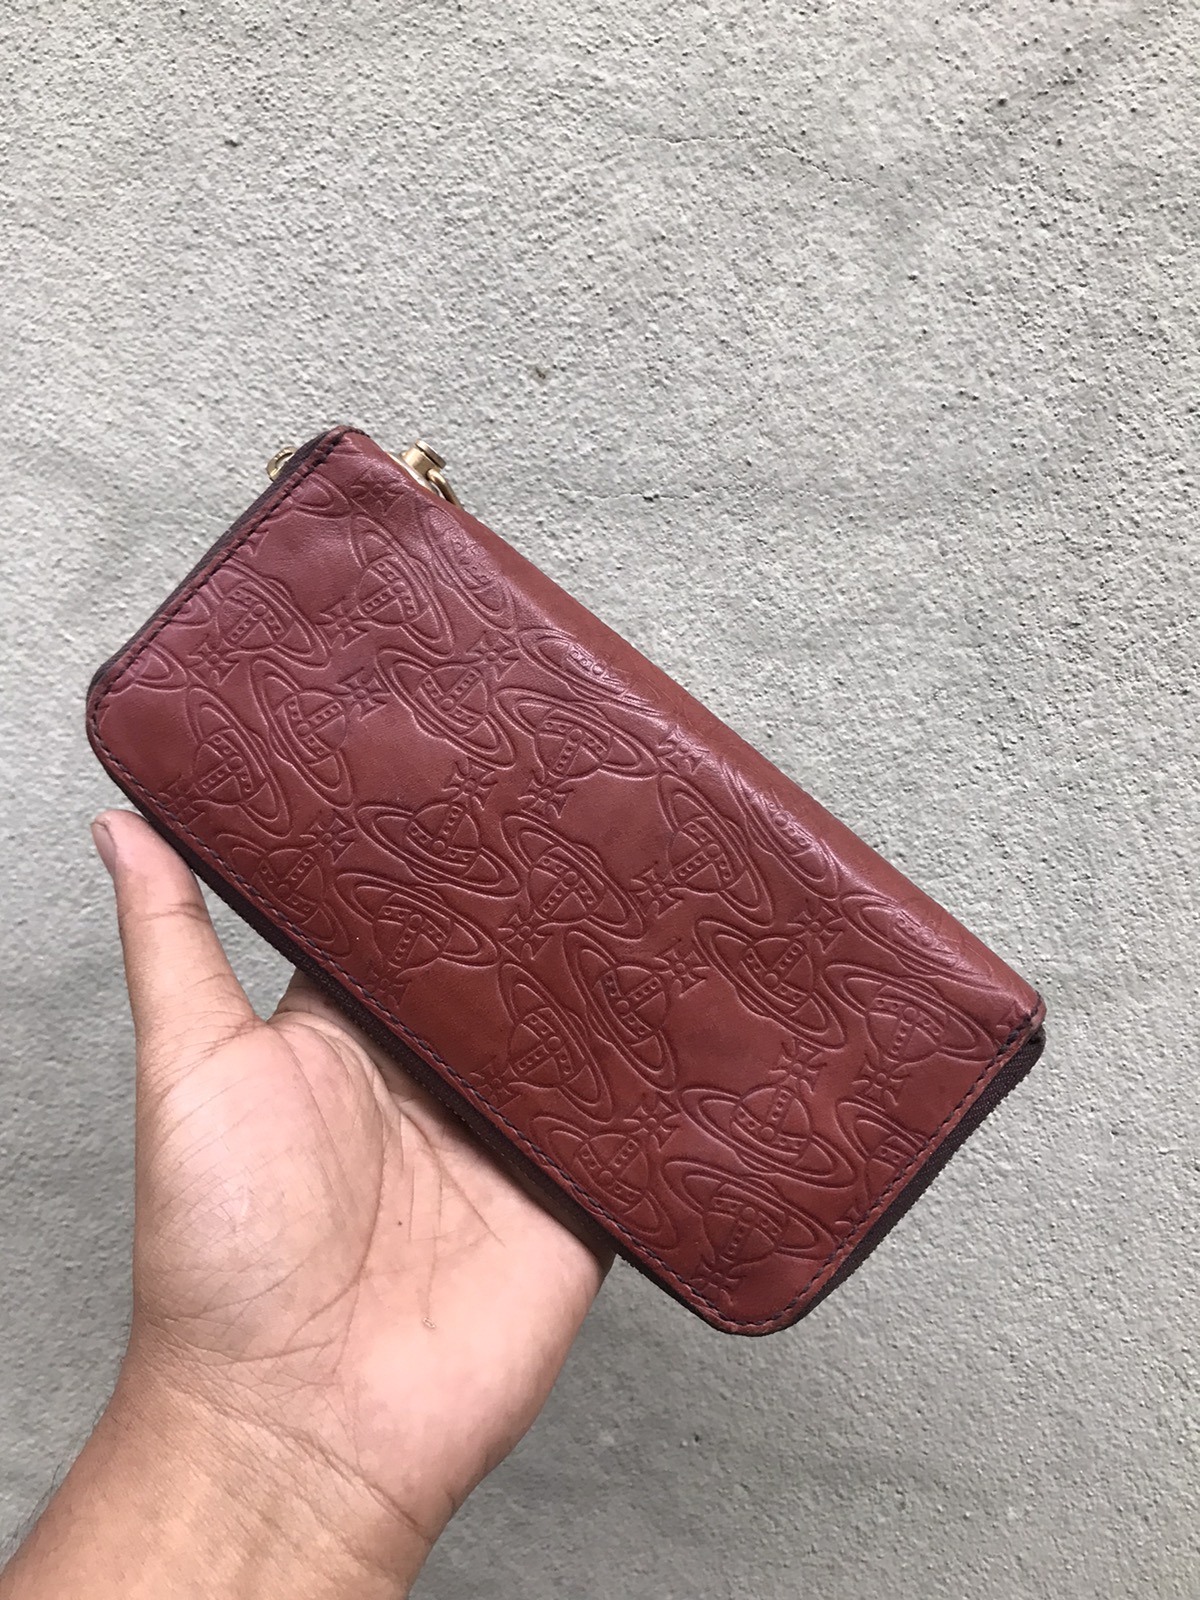 🔥OFFER🔥Authentic Vivienne Weswood Long Wallet - 1